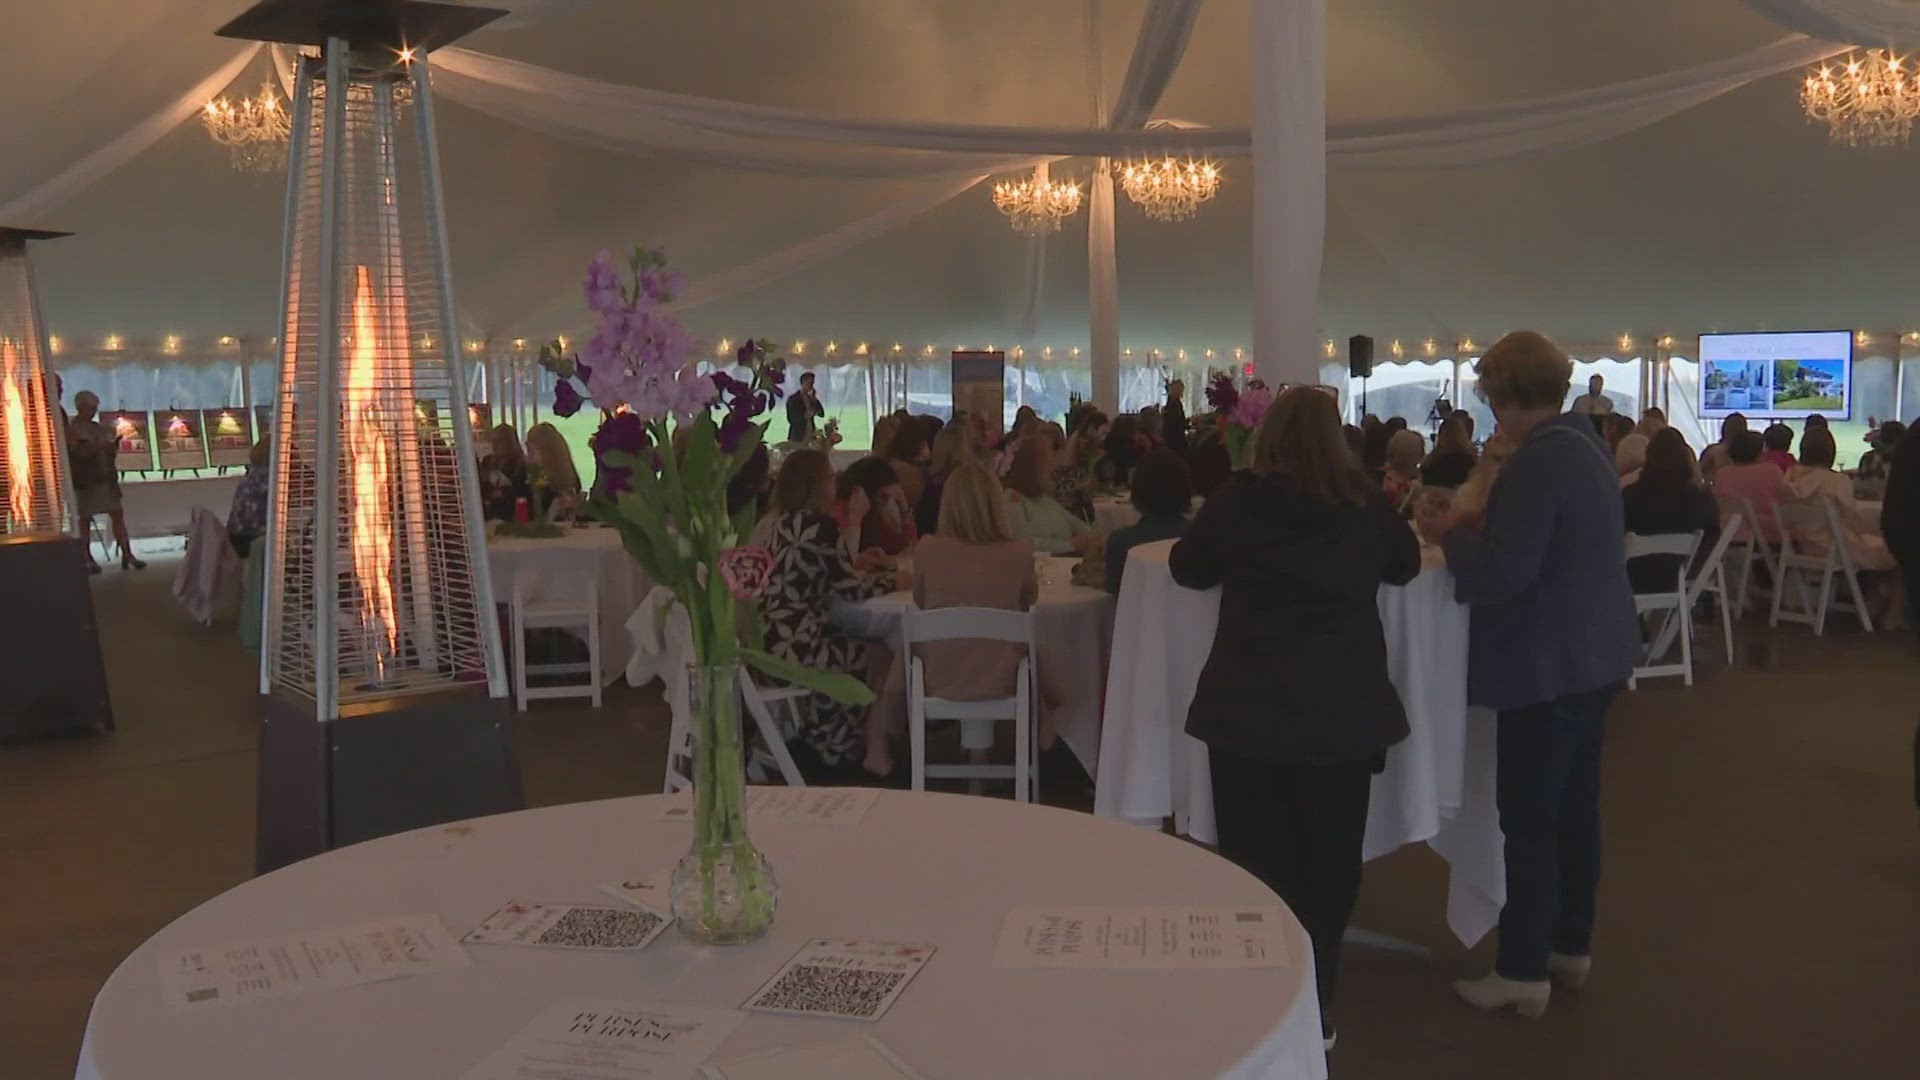 The Ronald McDonald House Charities Maine held the fundraiser showcasing art, accessories, and of course, purses.